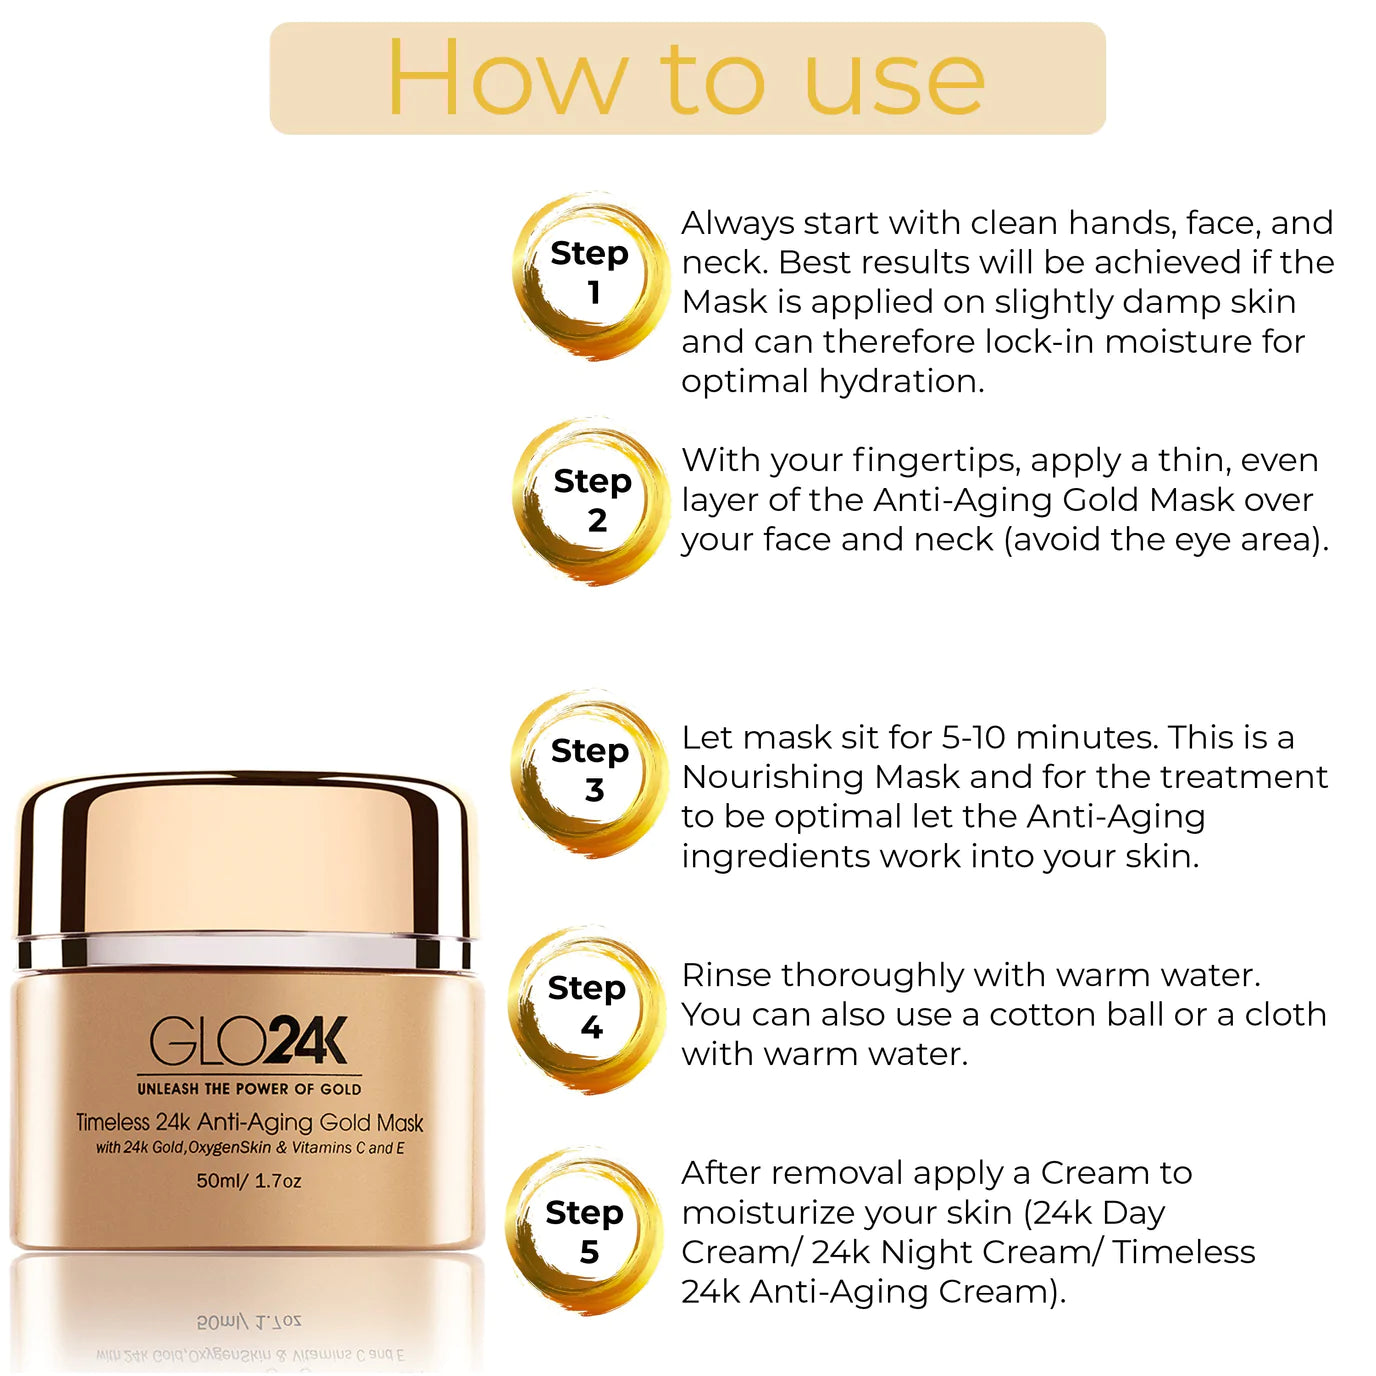 How to use GLO24K Timeless 24k Anti-Ageing Gold Mask